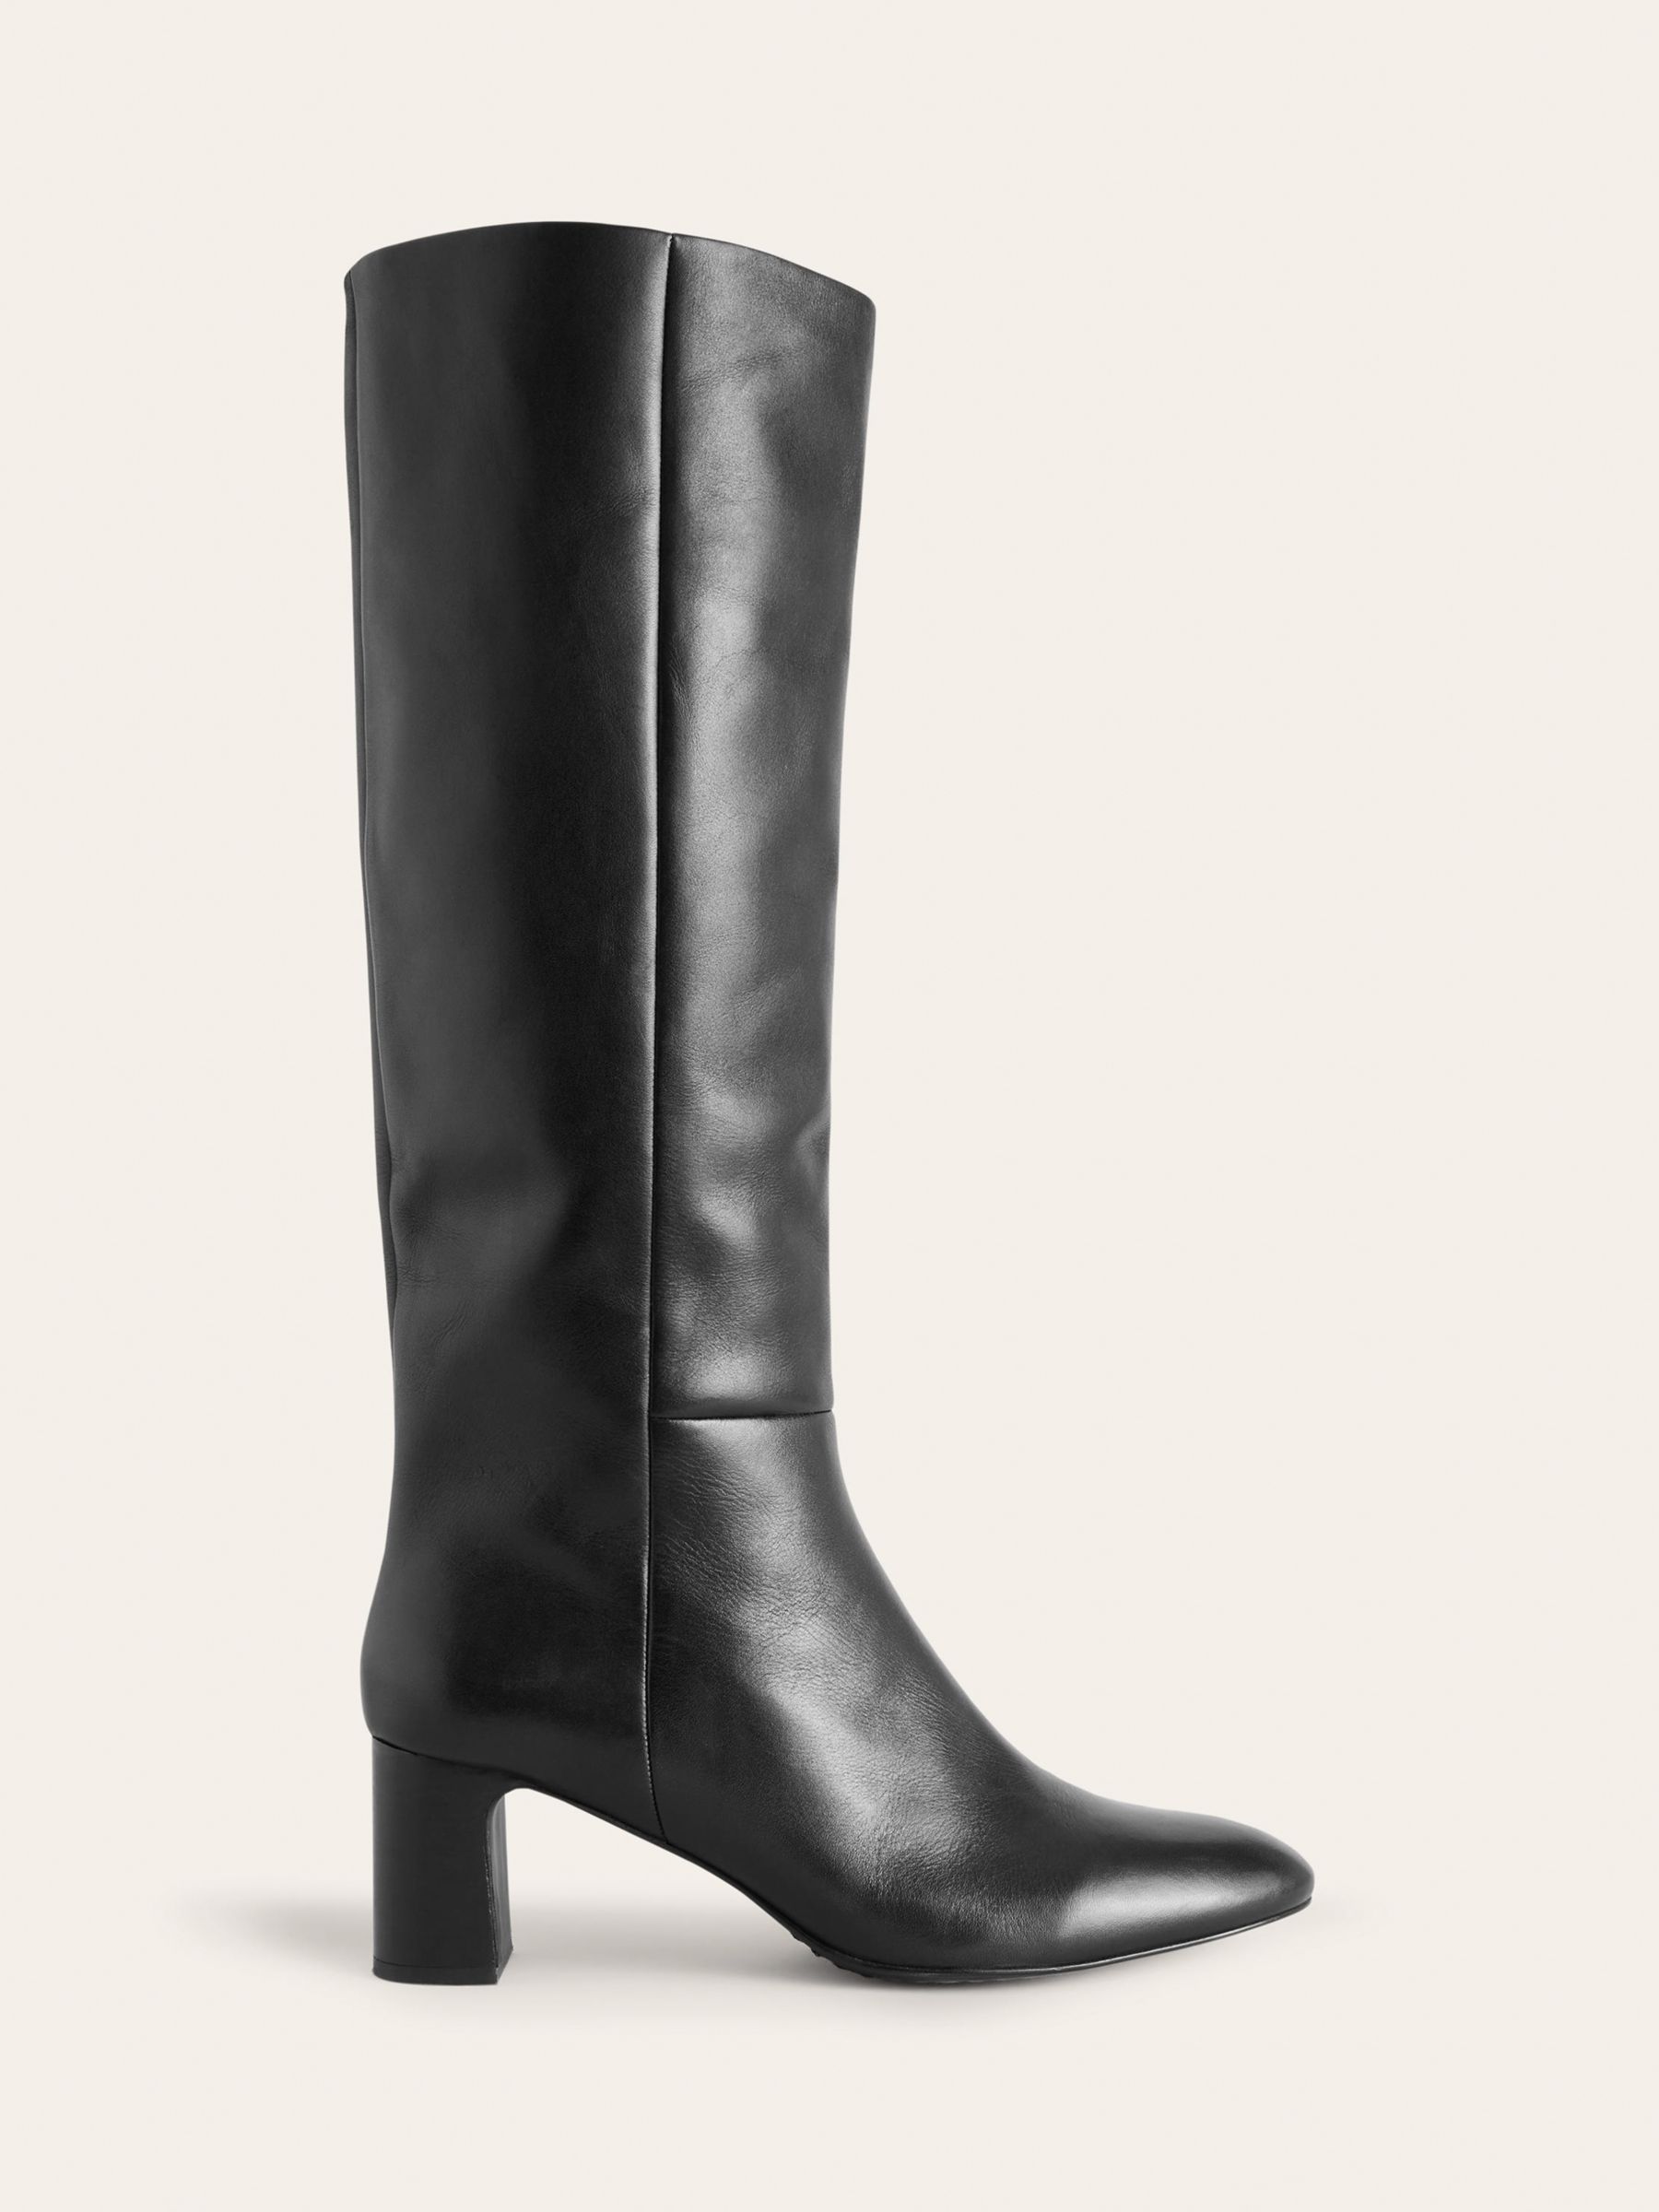 Boden Erica Knee High Leather Boots, Black